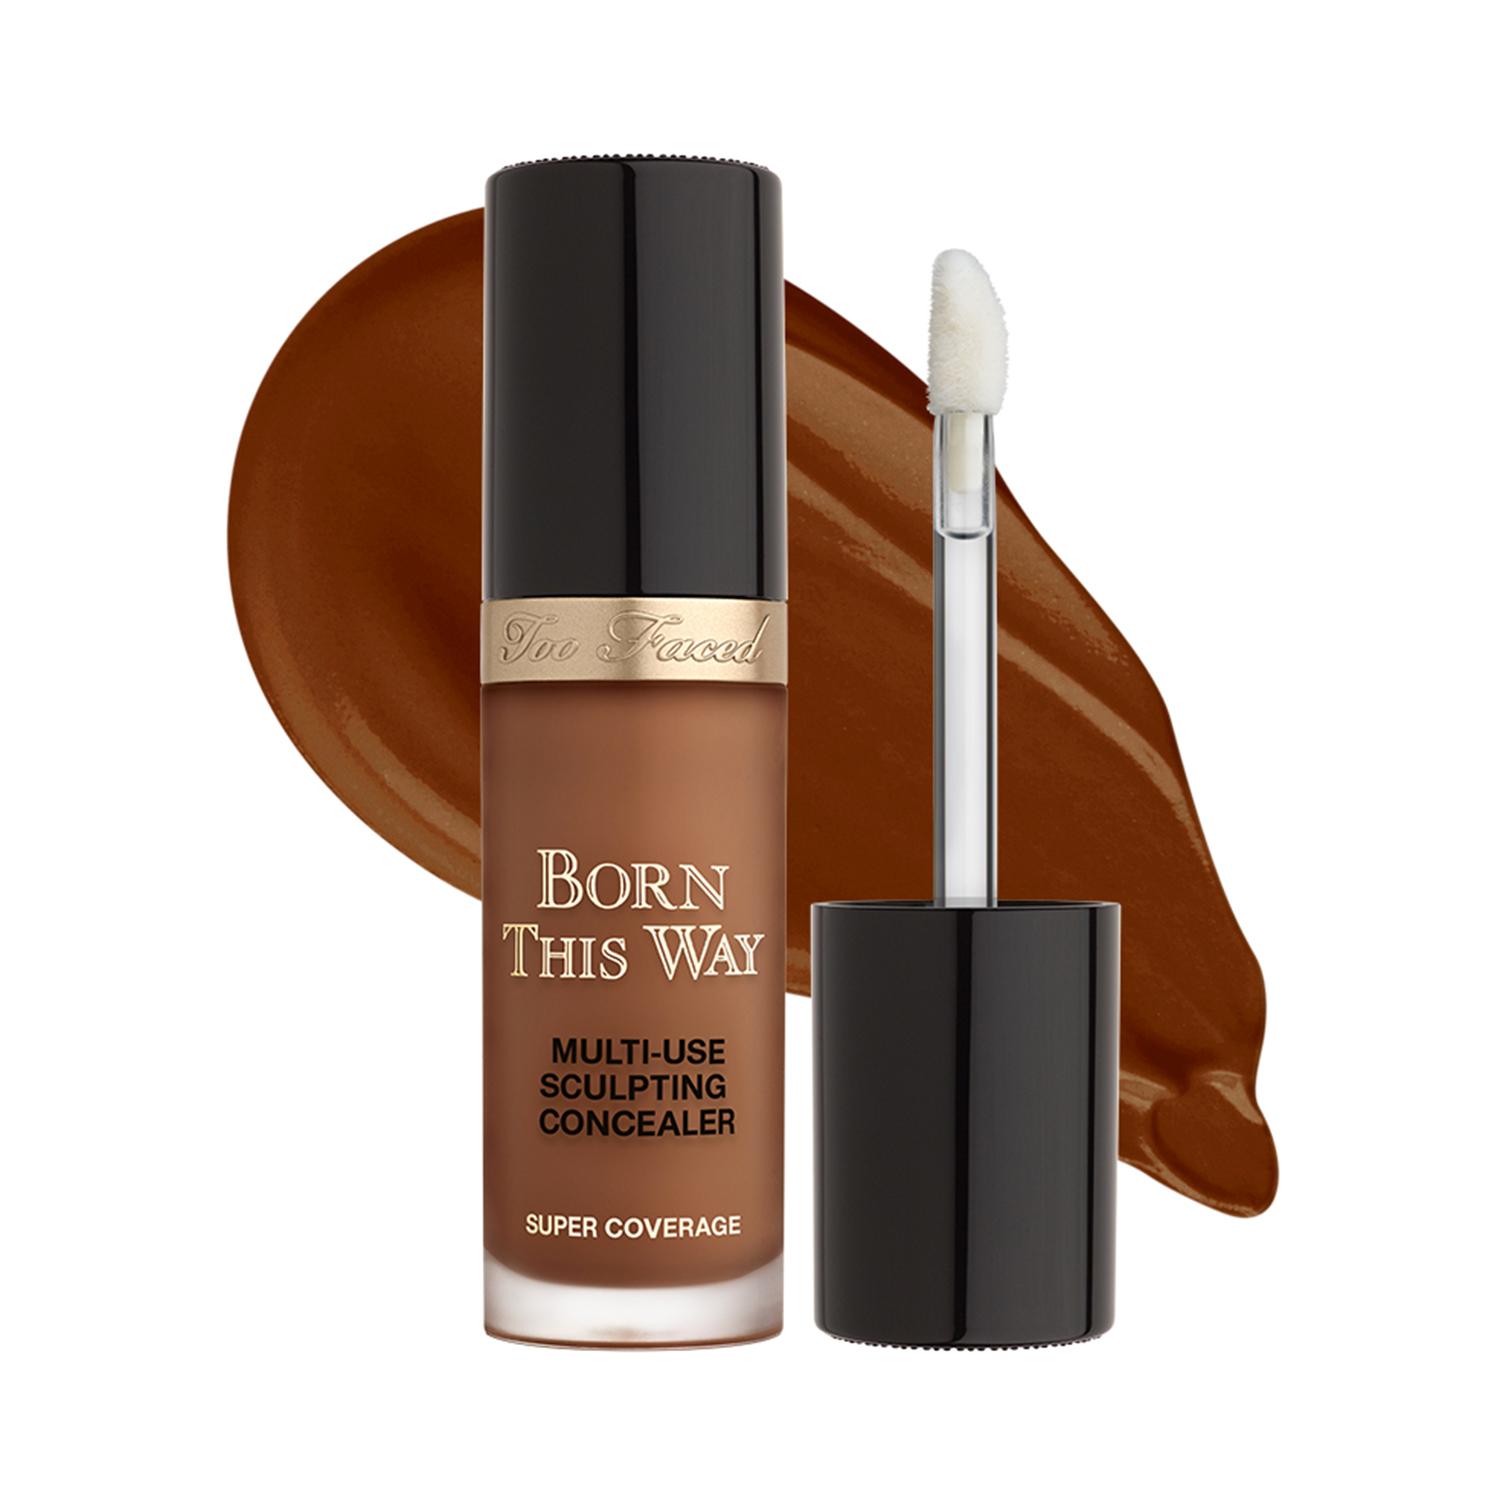 Too Faced Born This Way Super Coverage Multi Use Sculpting Concealer - Cocoa (13.5ml)